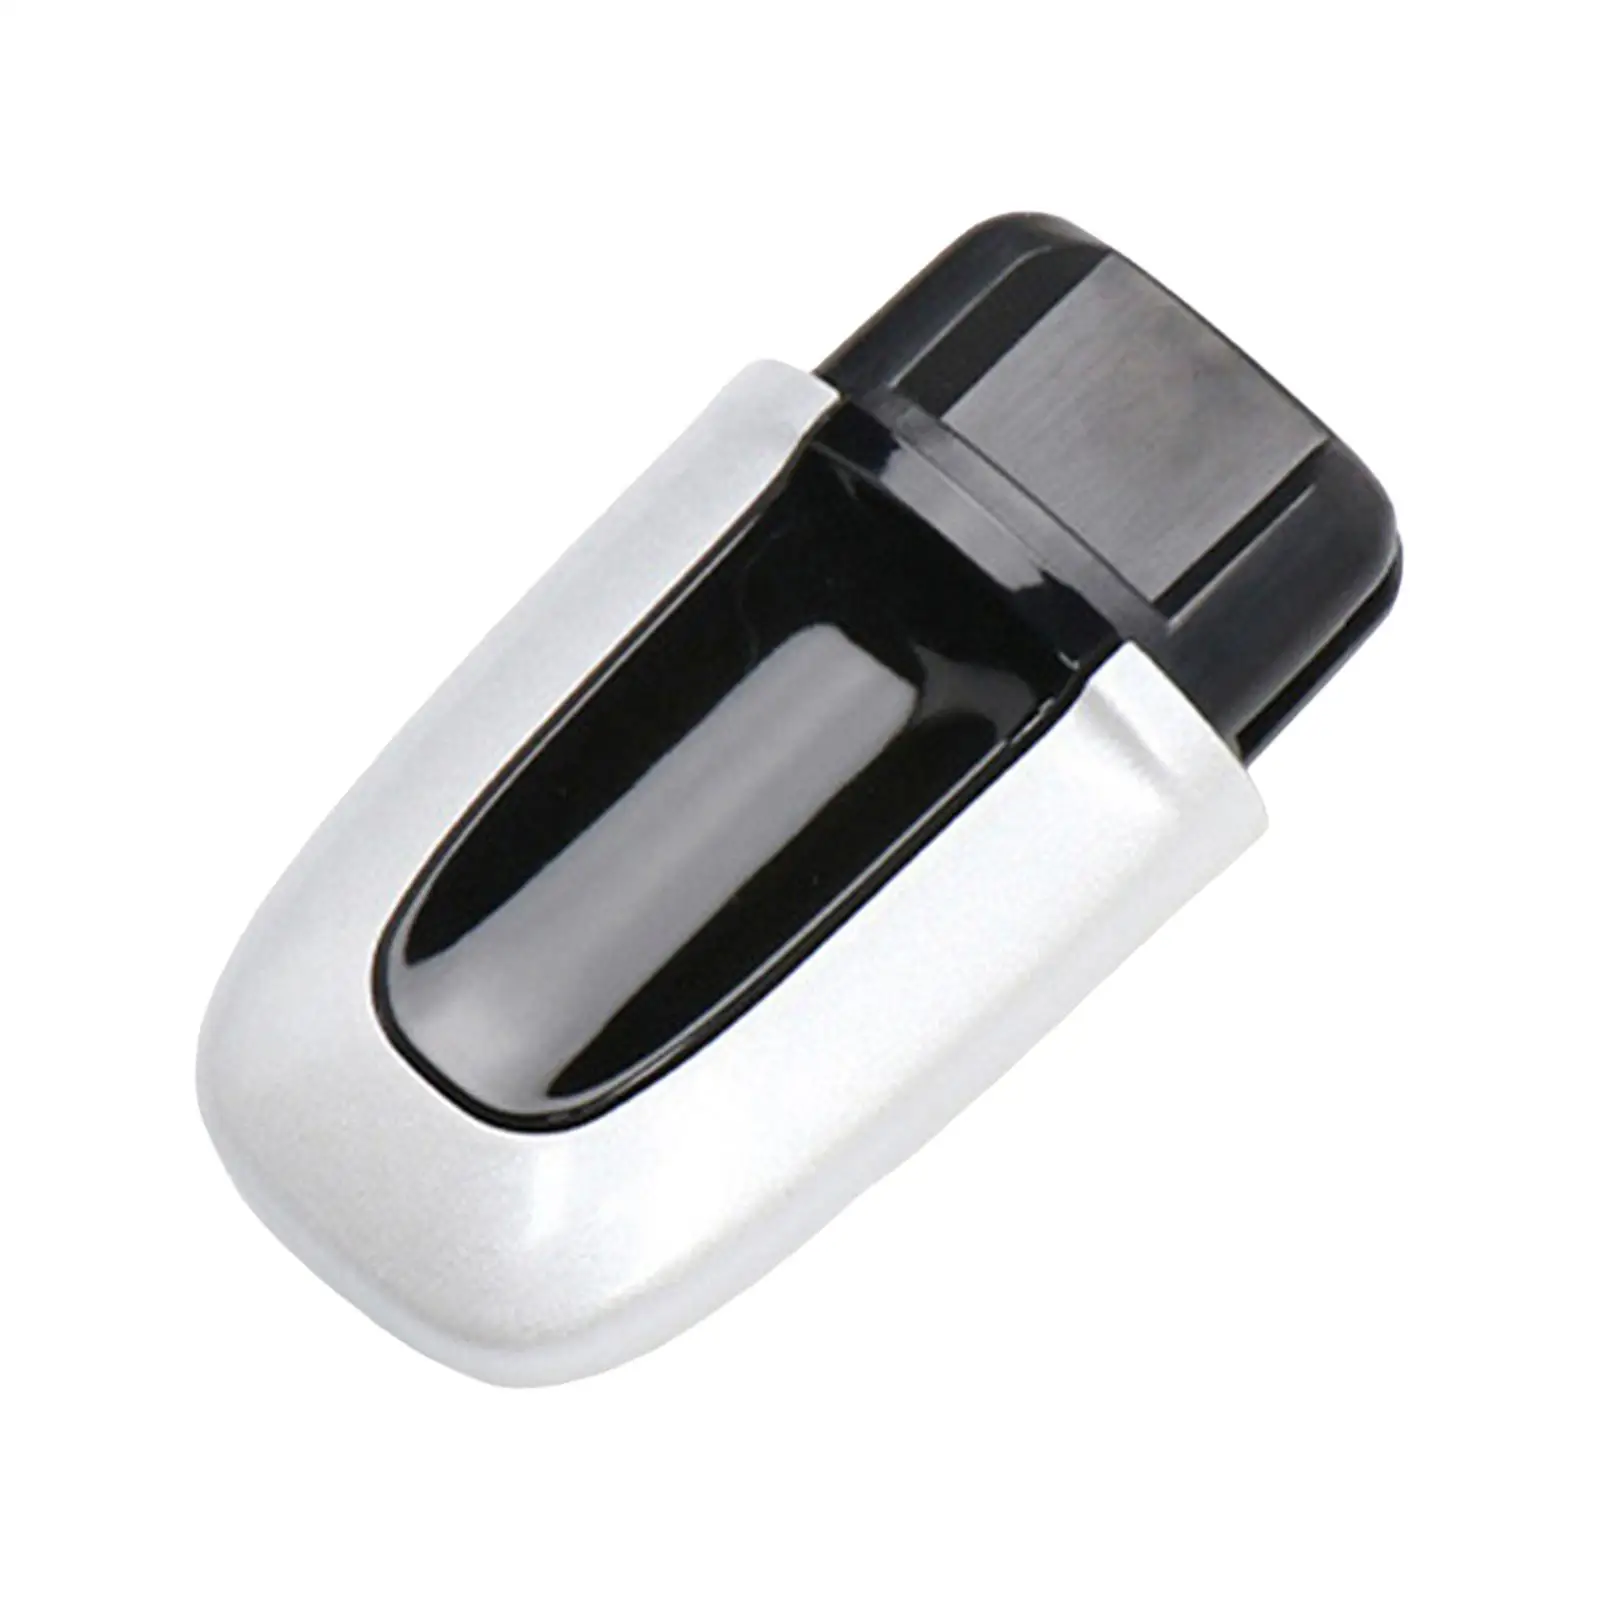 Entry and Drive Dummy Key Plug, 7PP919157A, Premium, High Performance, Car Accessories Replaces